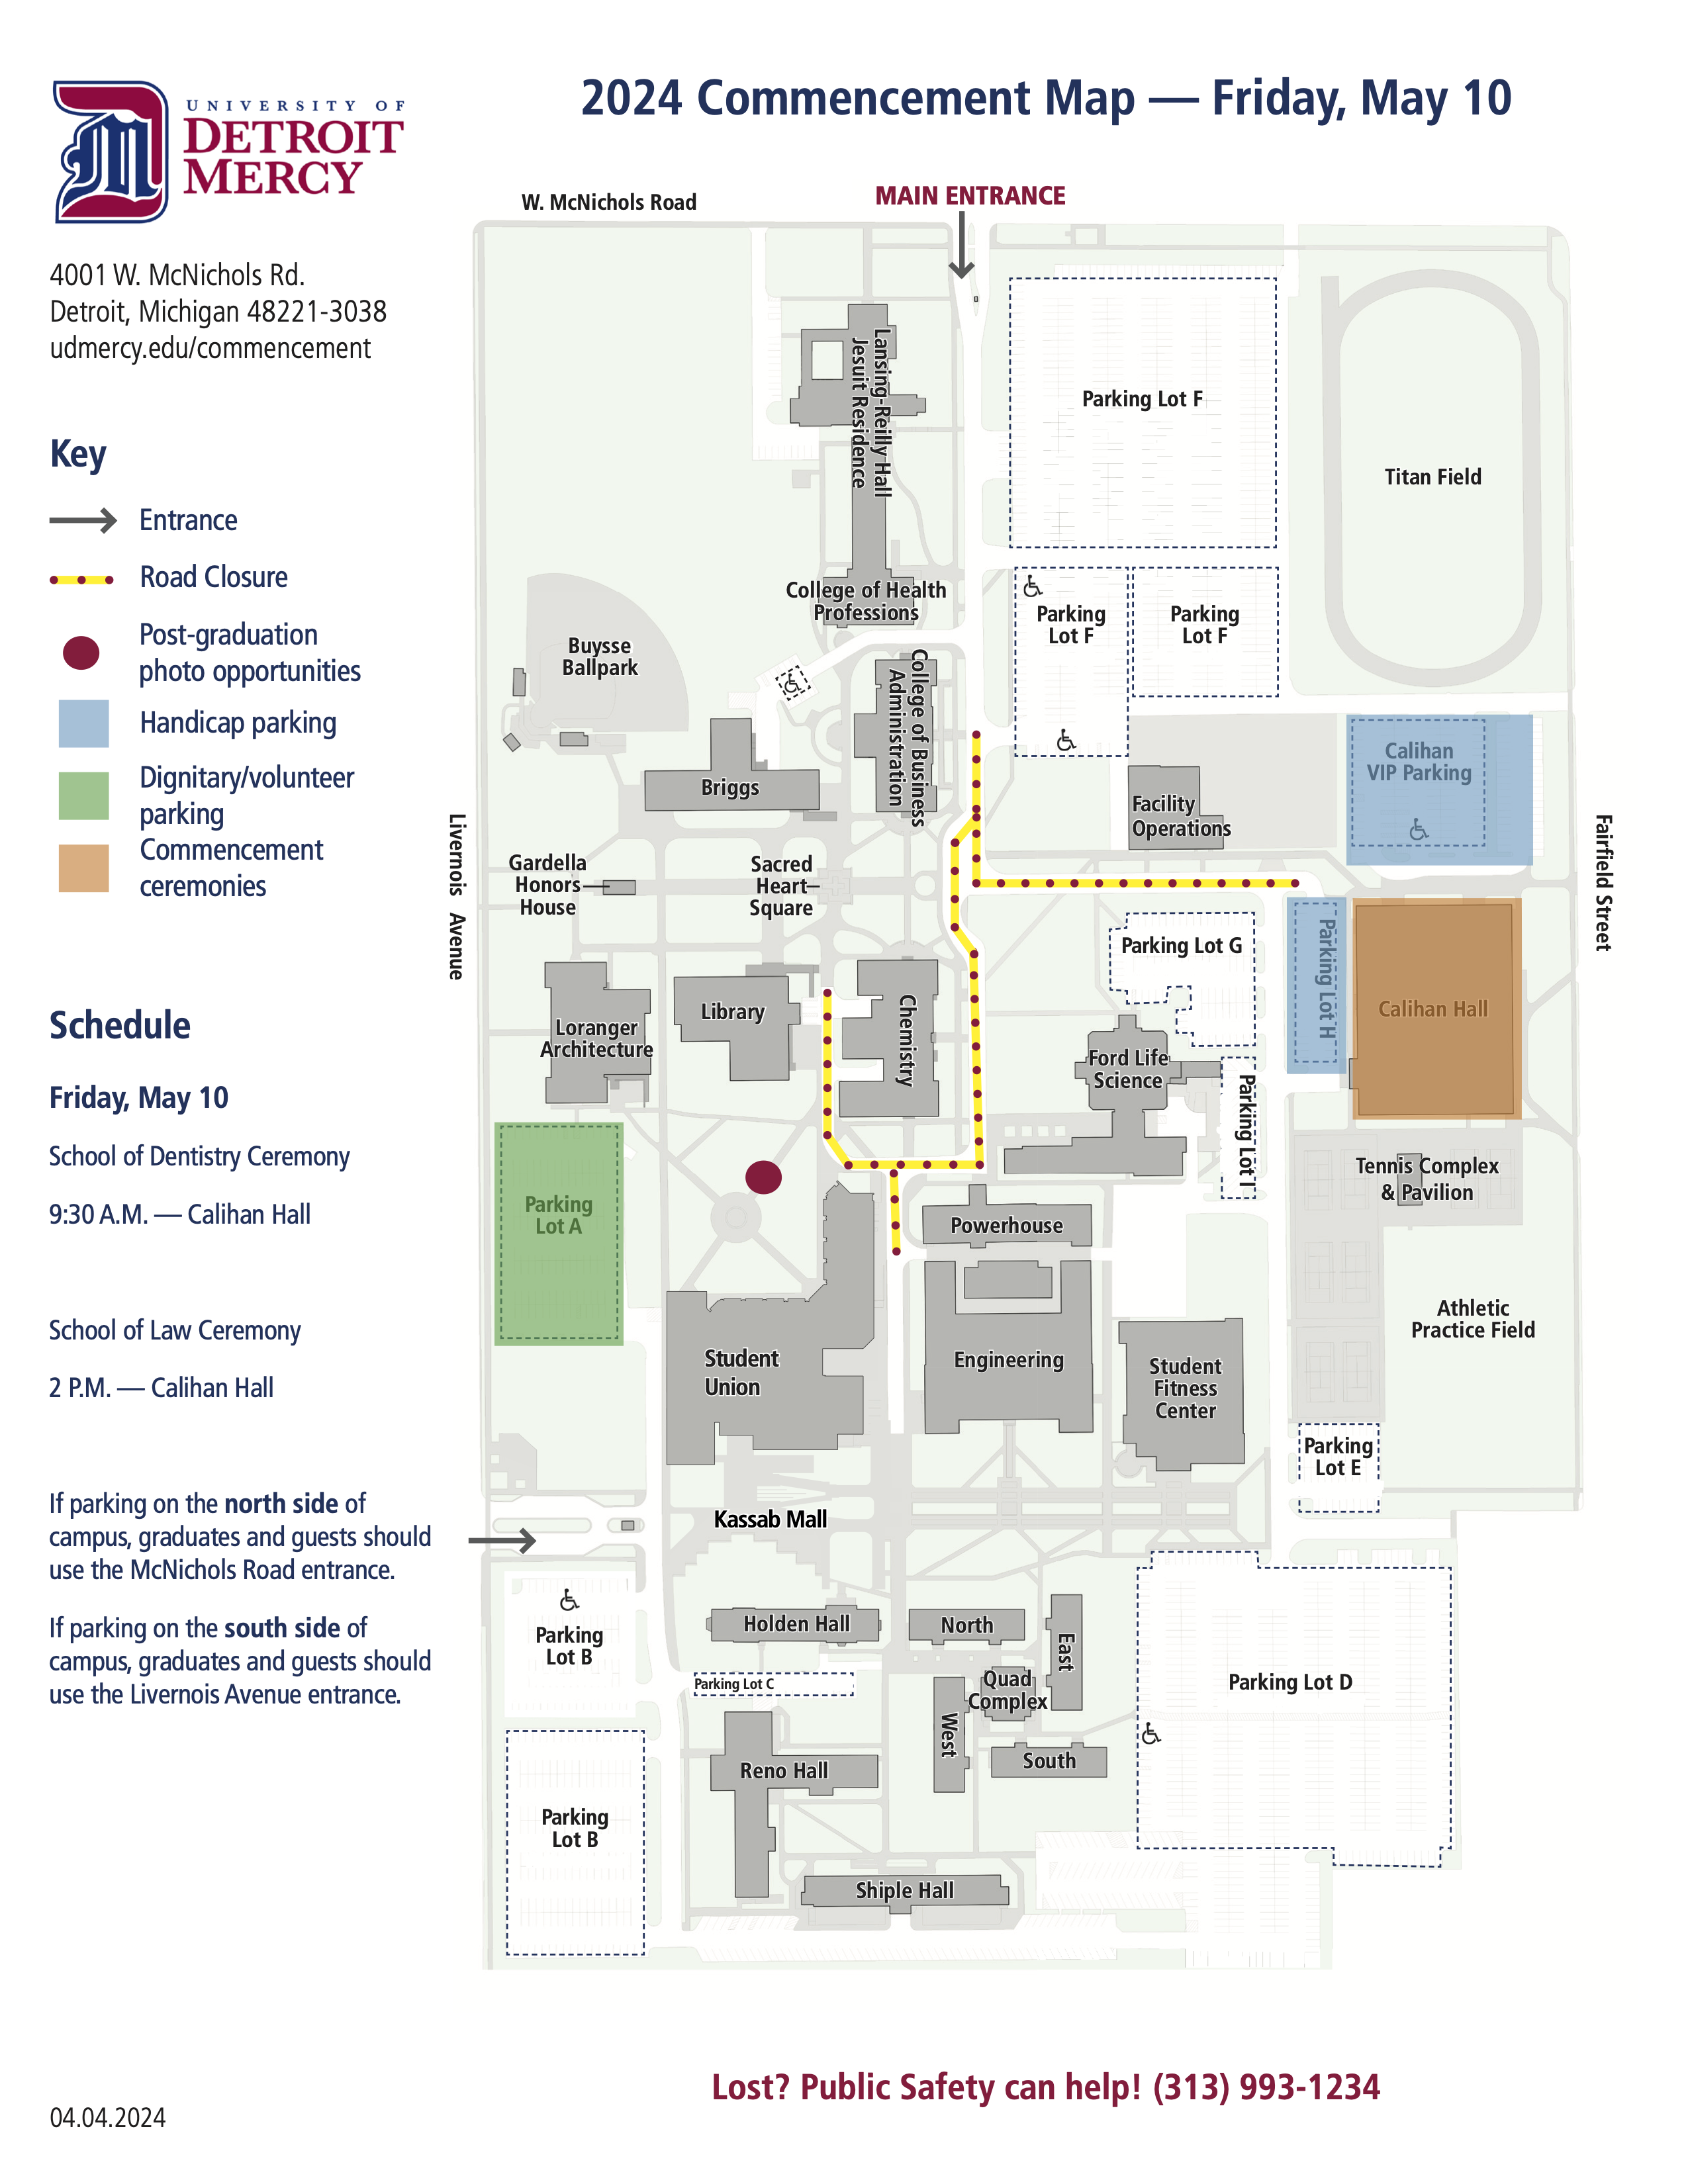 A Friday map for the McNichols commencement ceremonies at Detroit Mercy.